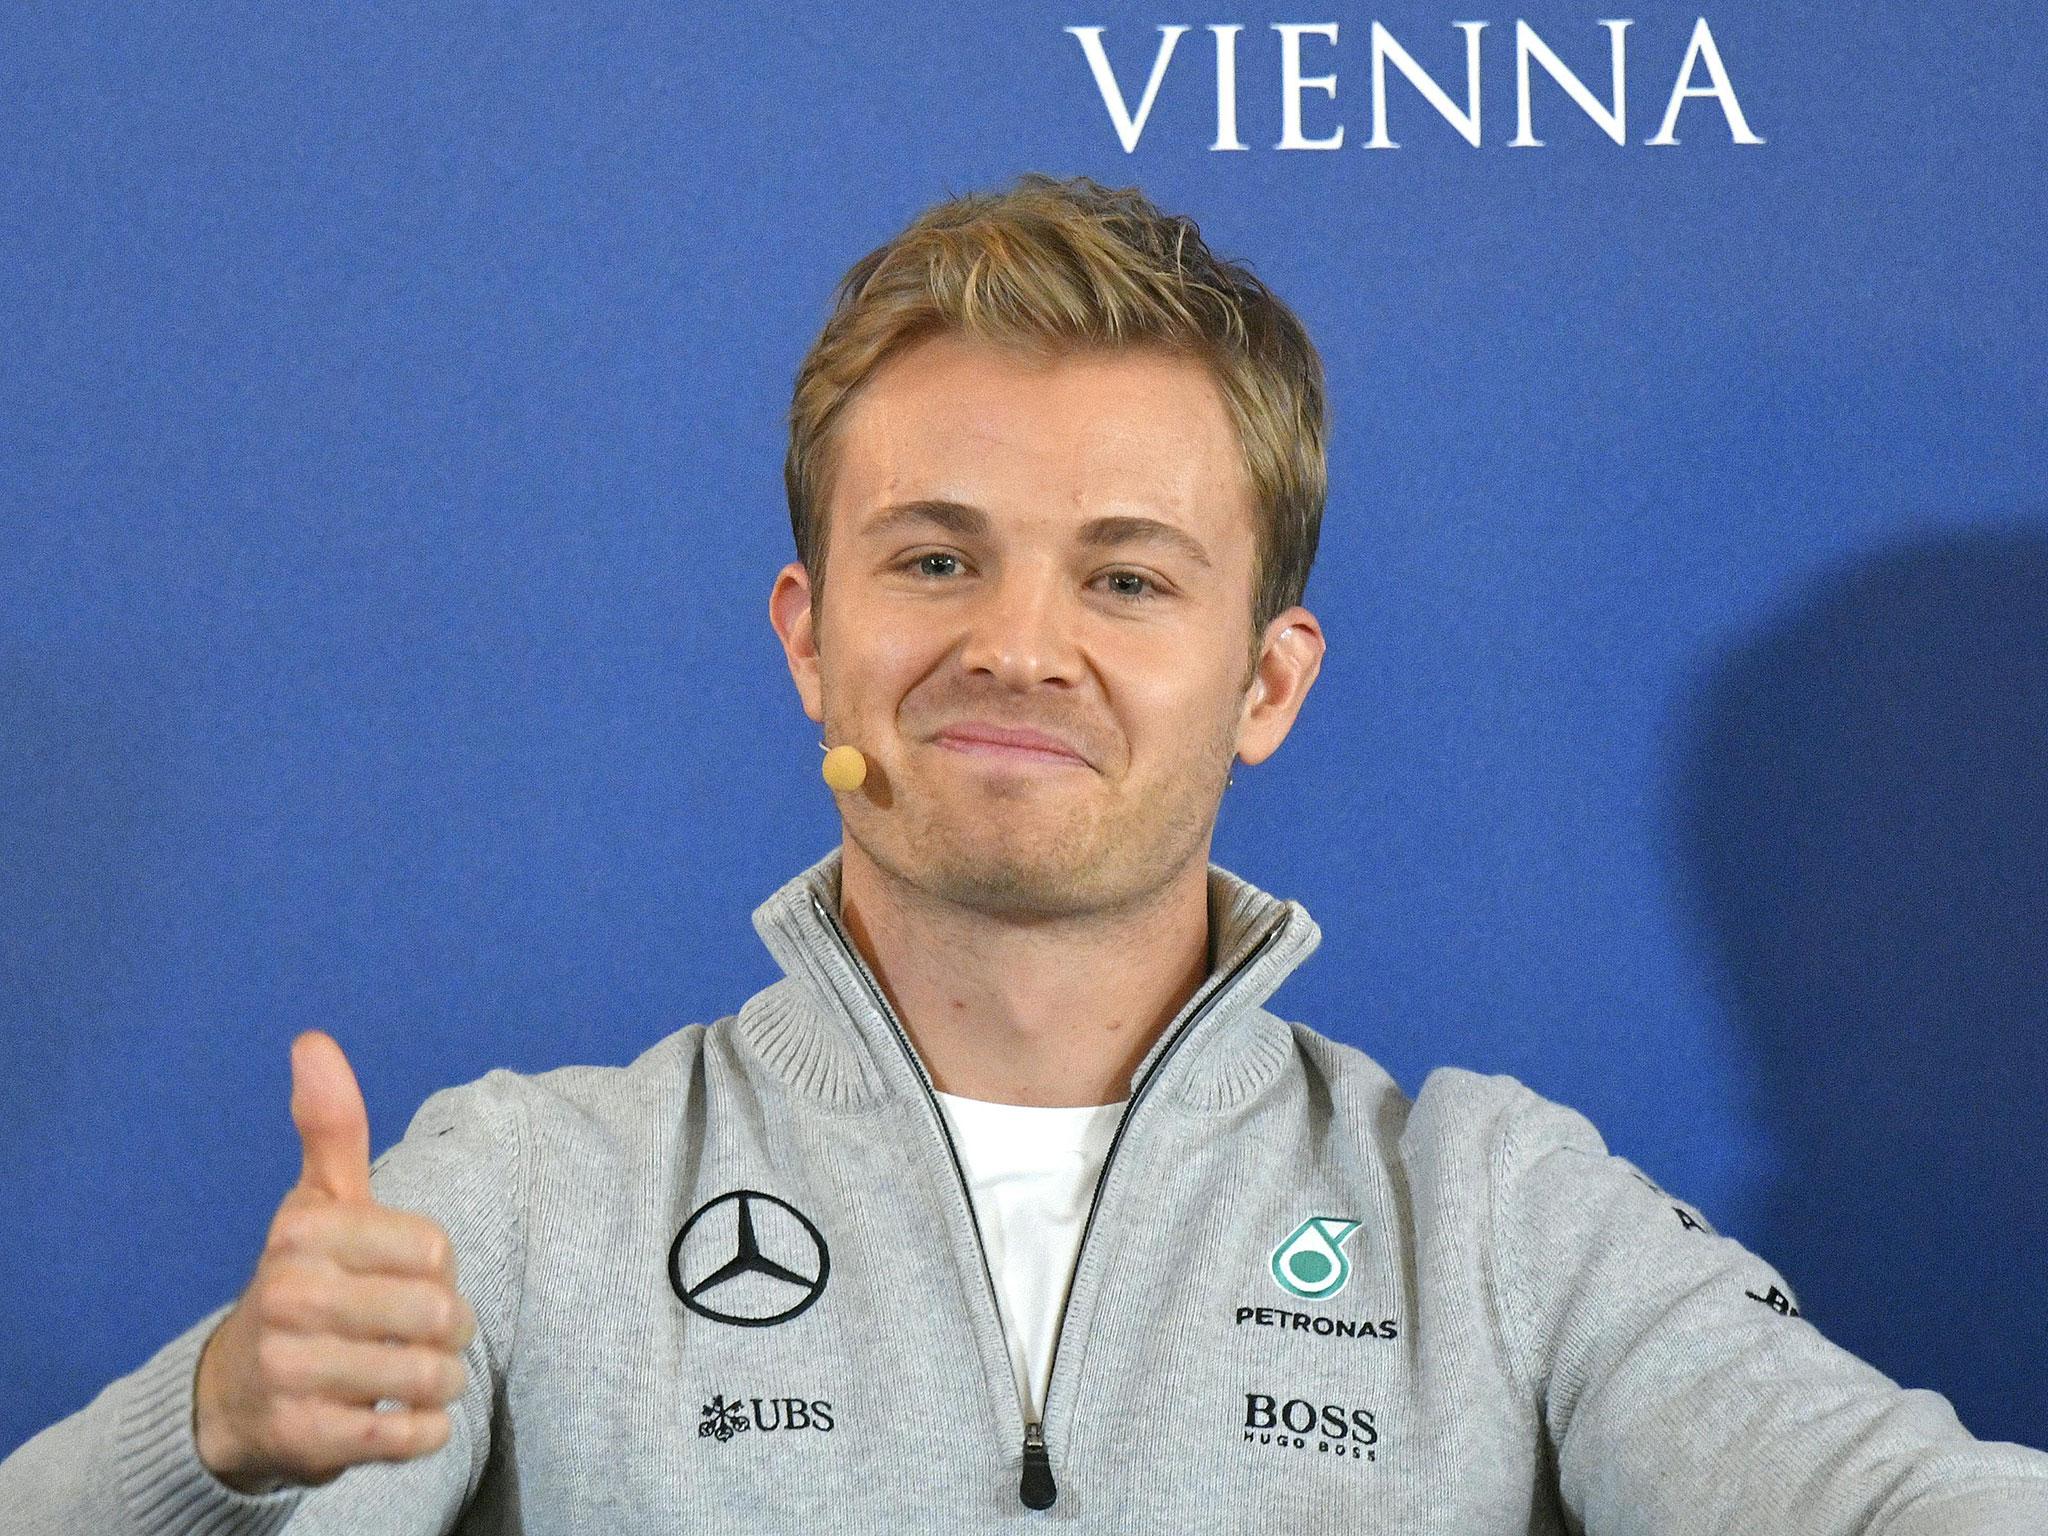 Nico Rosberg has announced his immediate retirement from Formula One